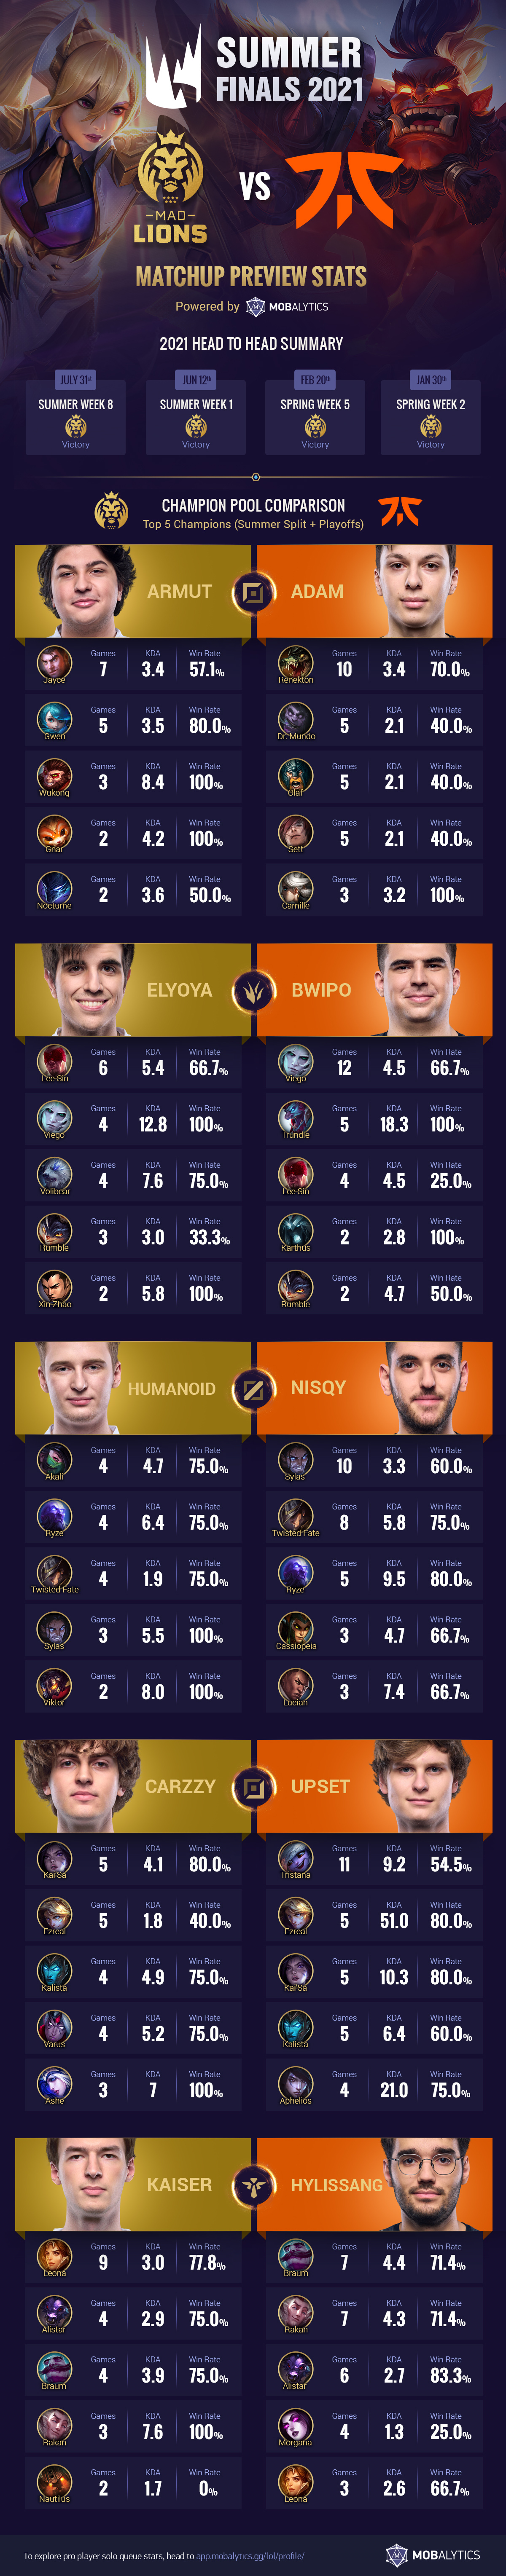 2021 LEC Summer Finals: MAD vs FNC – Matchup Preview Stats (Infographic)